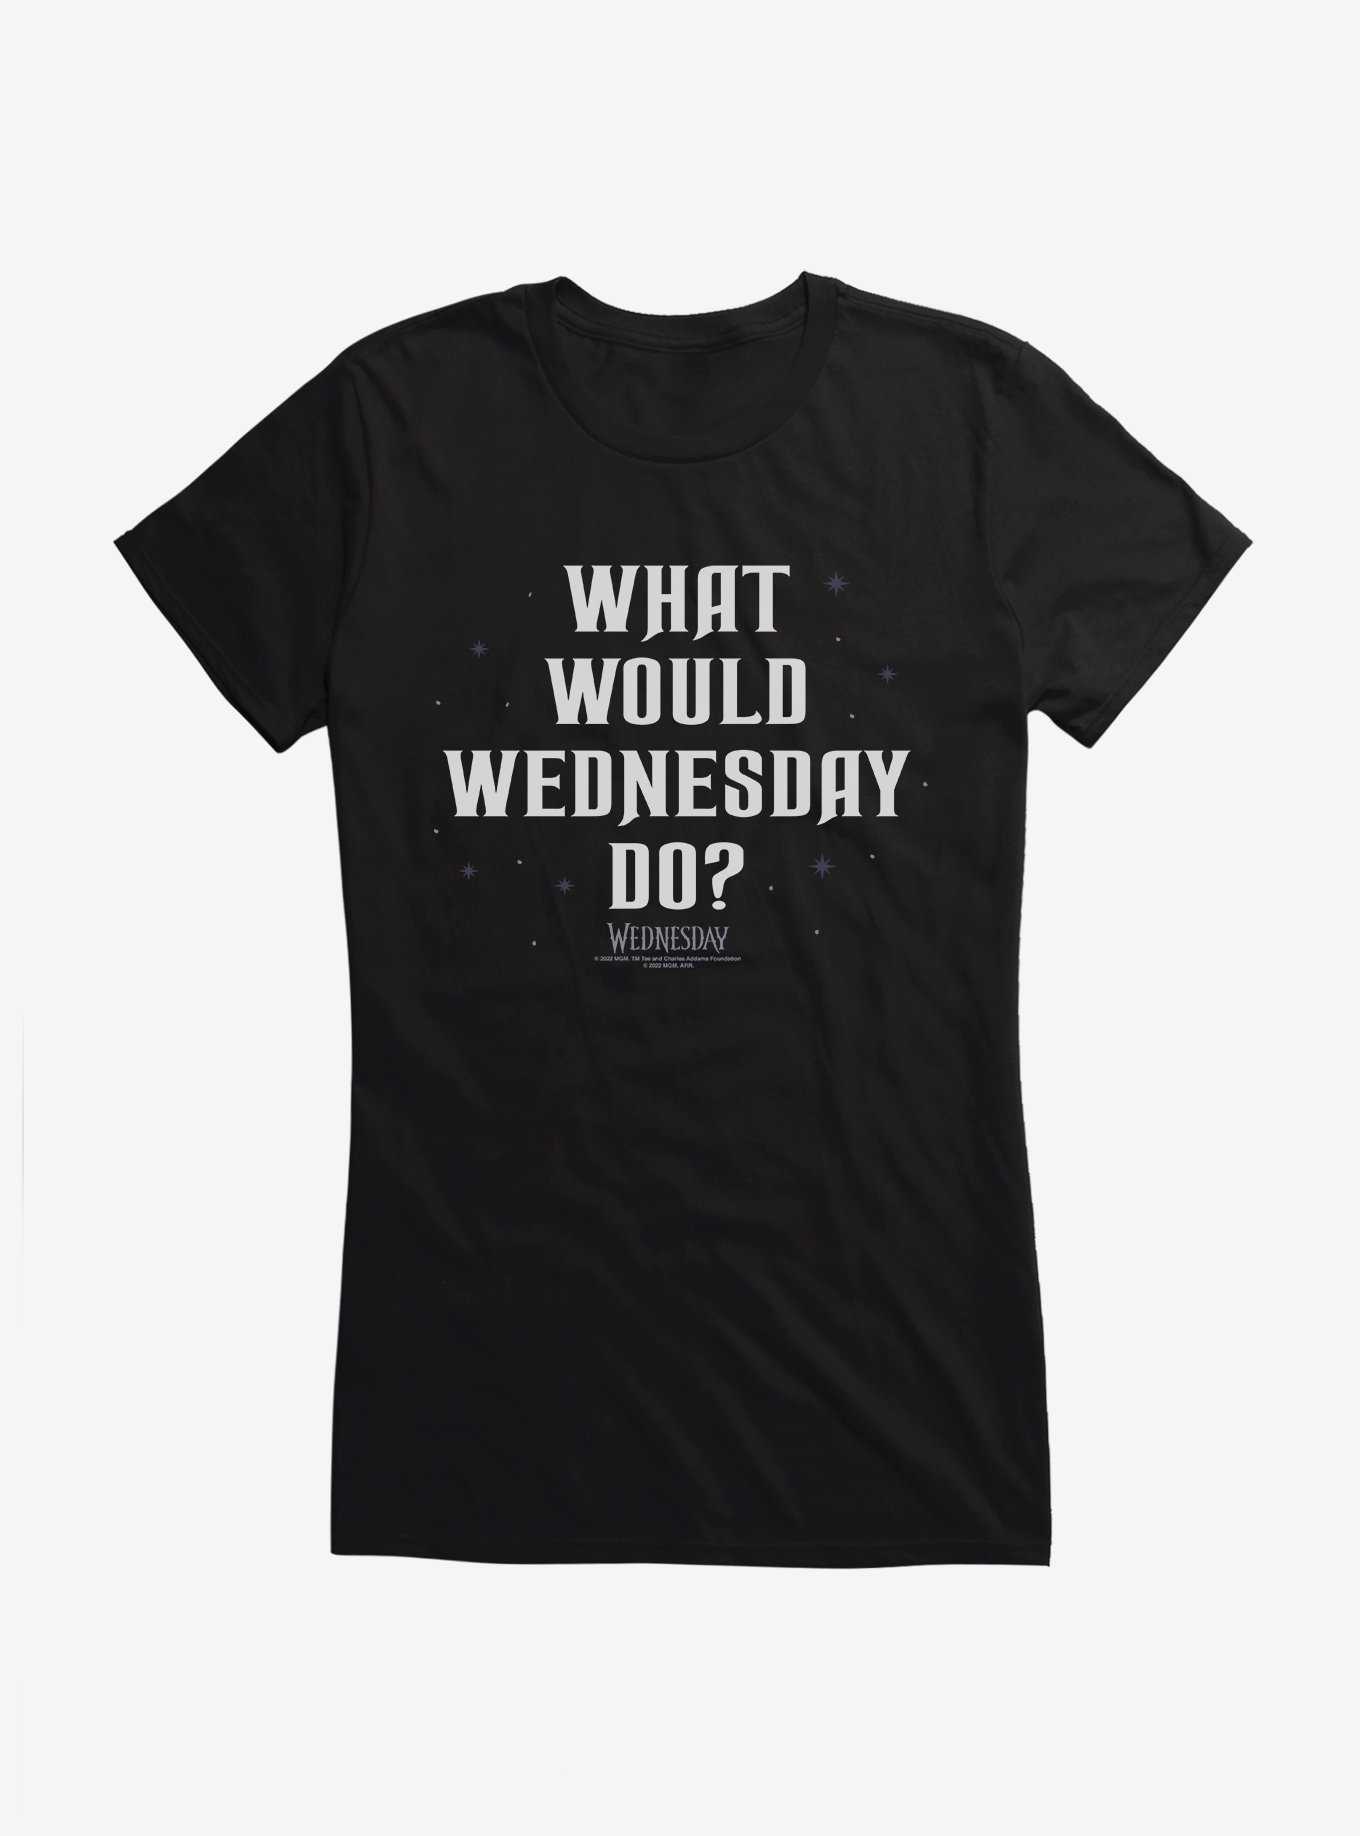 Wednesday What Would Wednesday Do? Girls T-Shirt, , hi-res